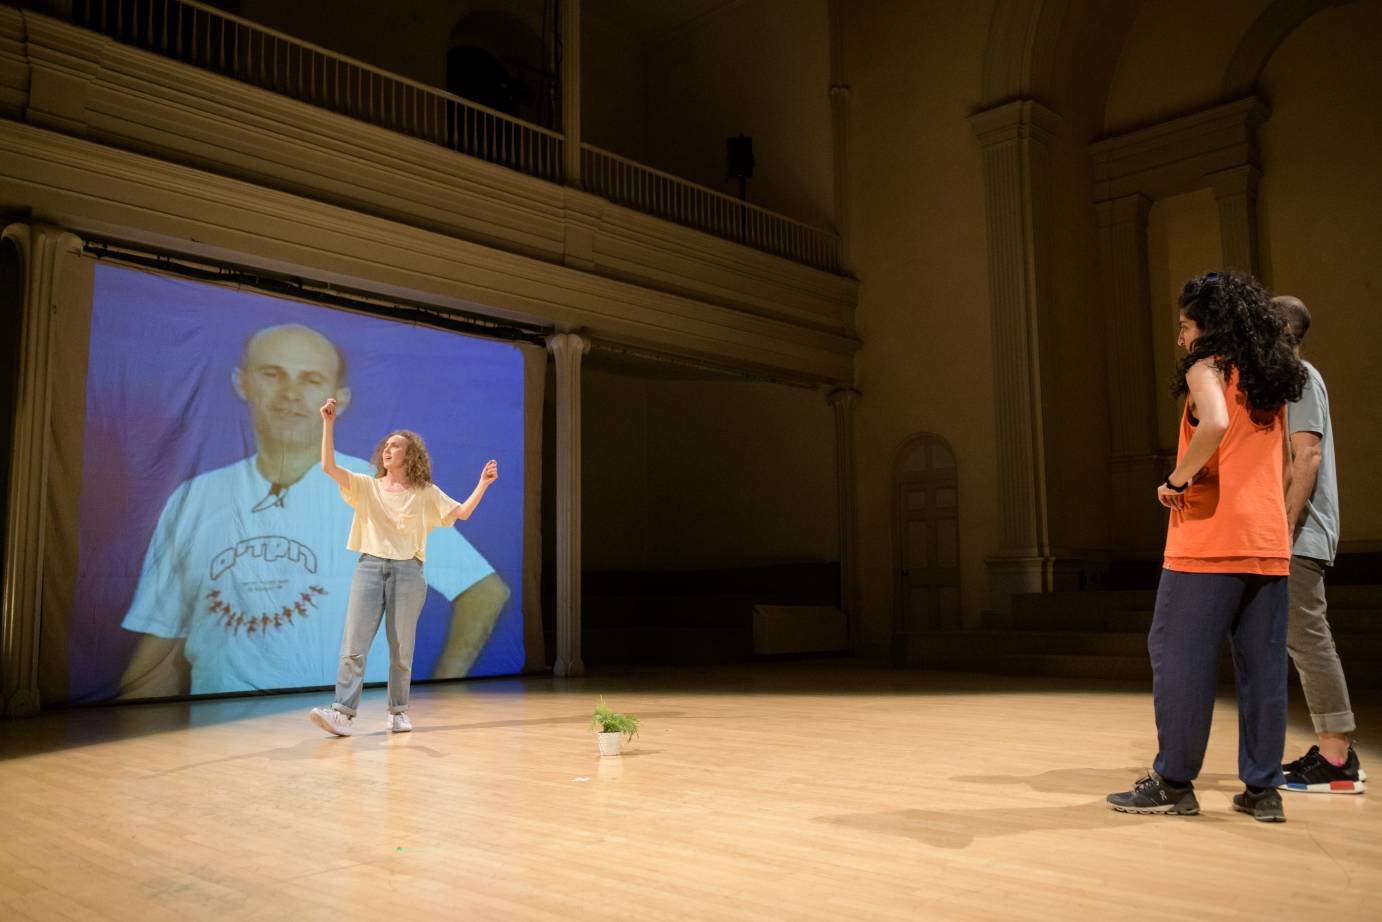 A woman dances in front of a projection of a man while people watch